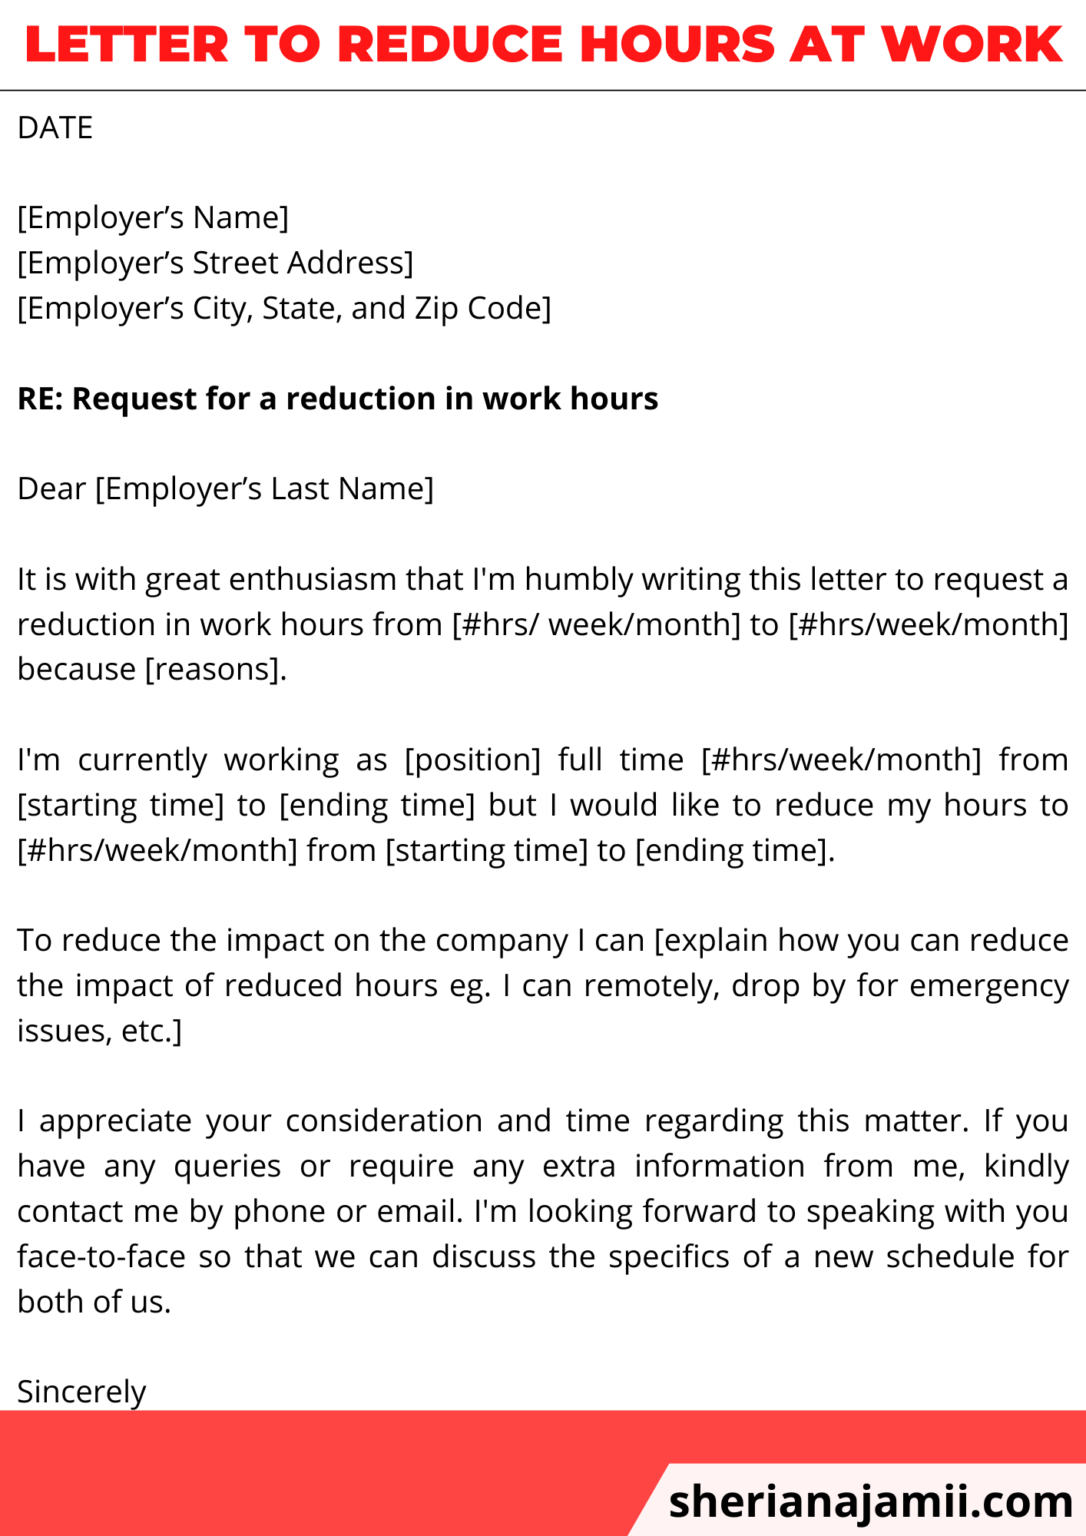 Sample Letter To Reduce Hours At Work Download Printa vrogue co